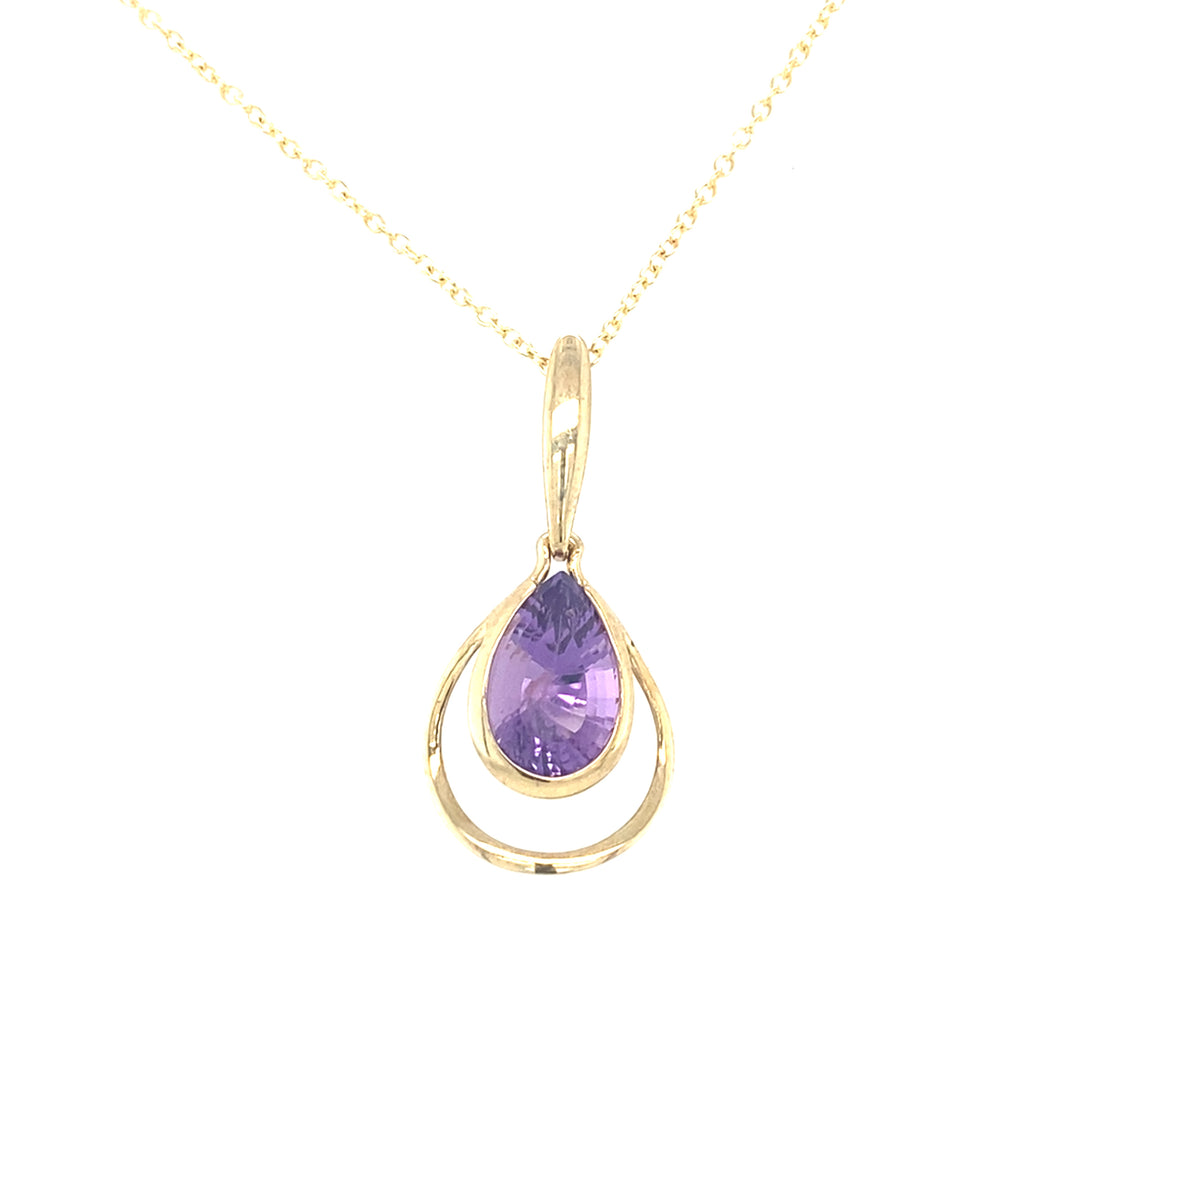 9kt Gold Pendant with Amethyst Coloured Stone